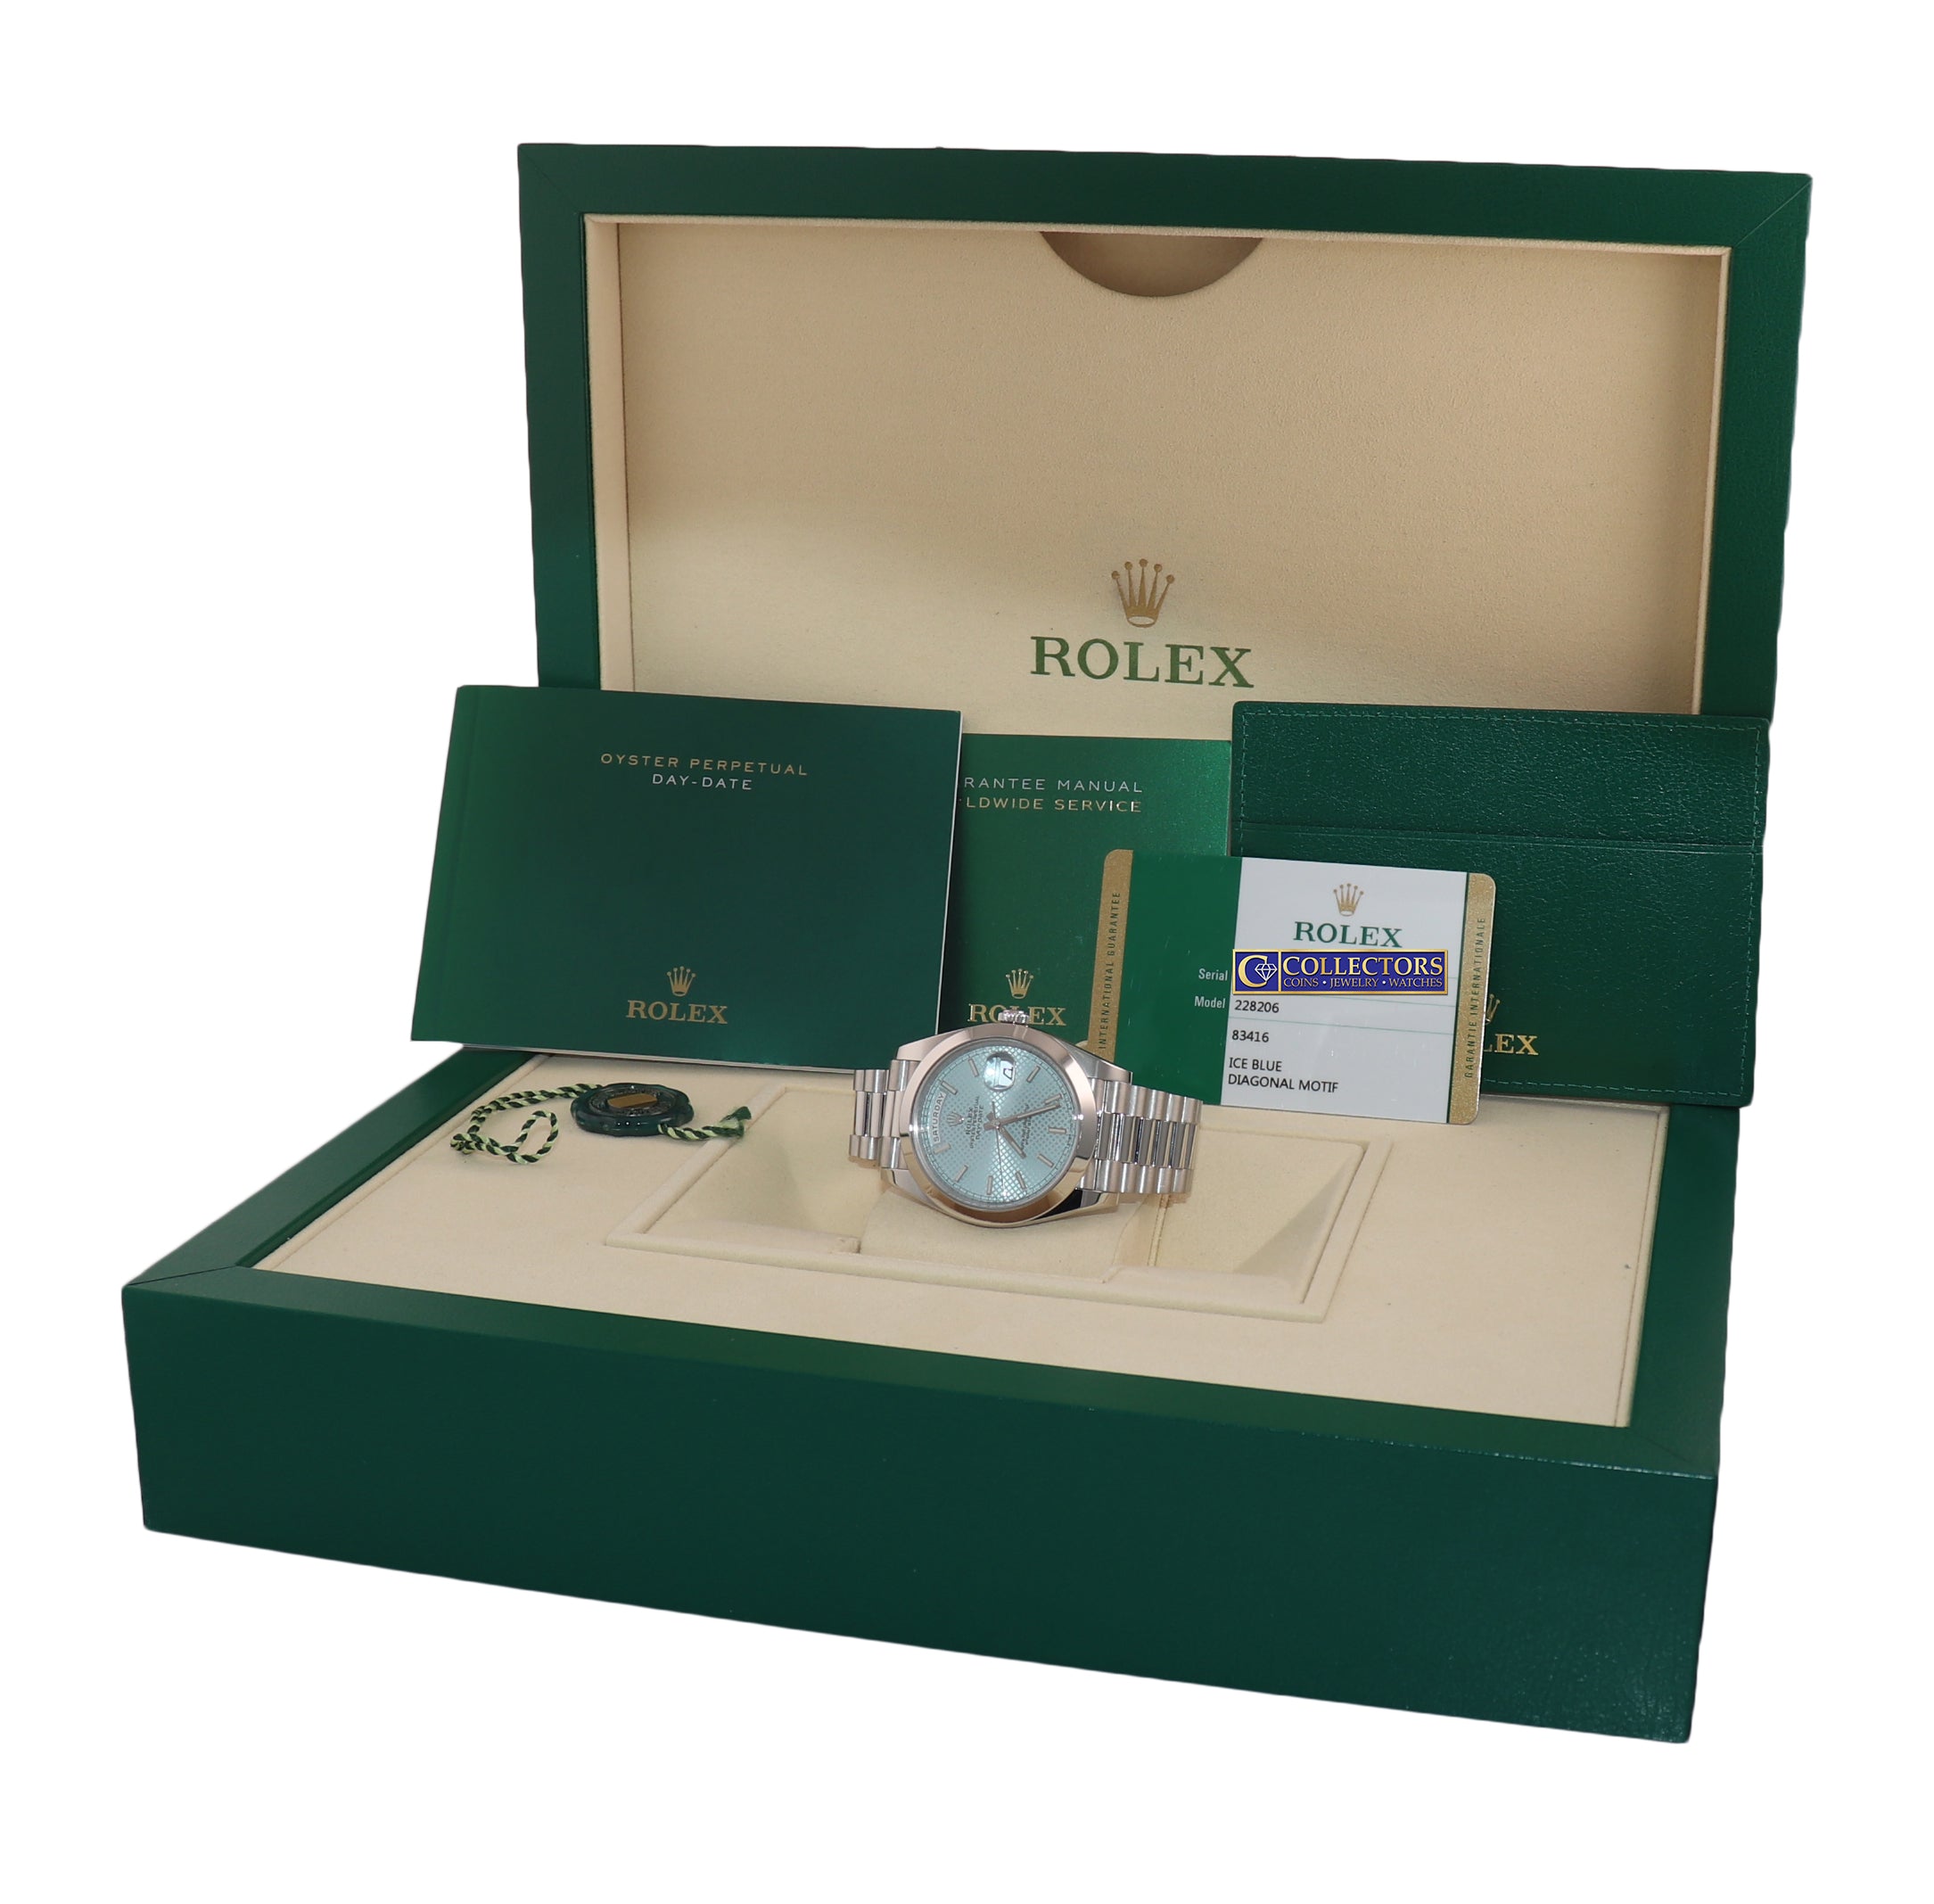 NEW 2019 PAPERS Rolex Platinum President Day Date Blue Motif 228206 Watch Box